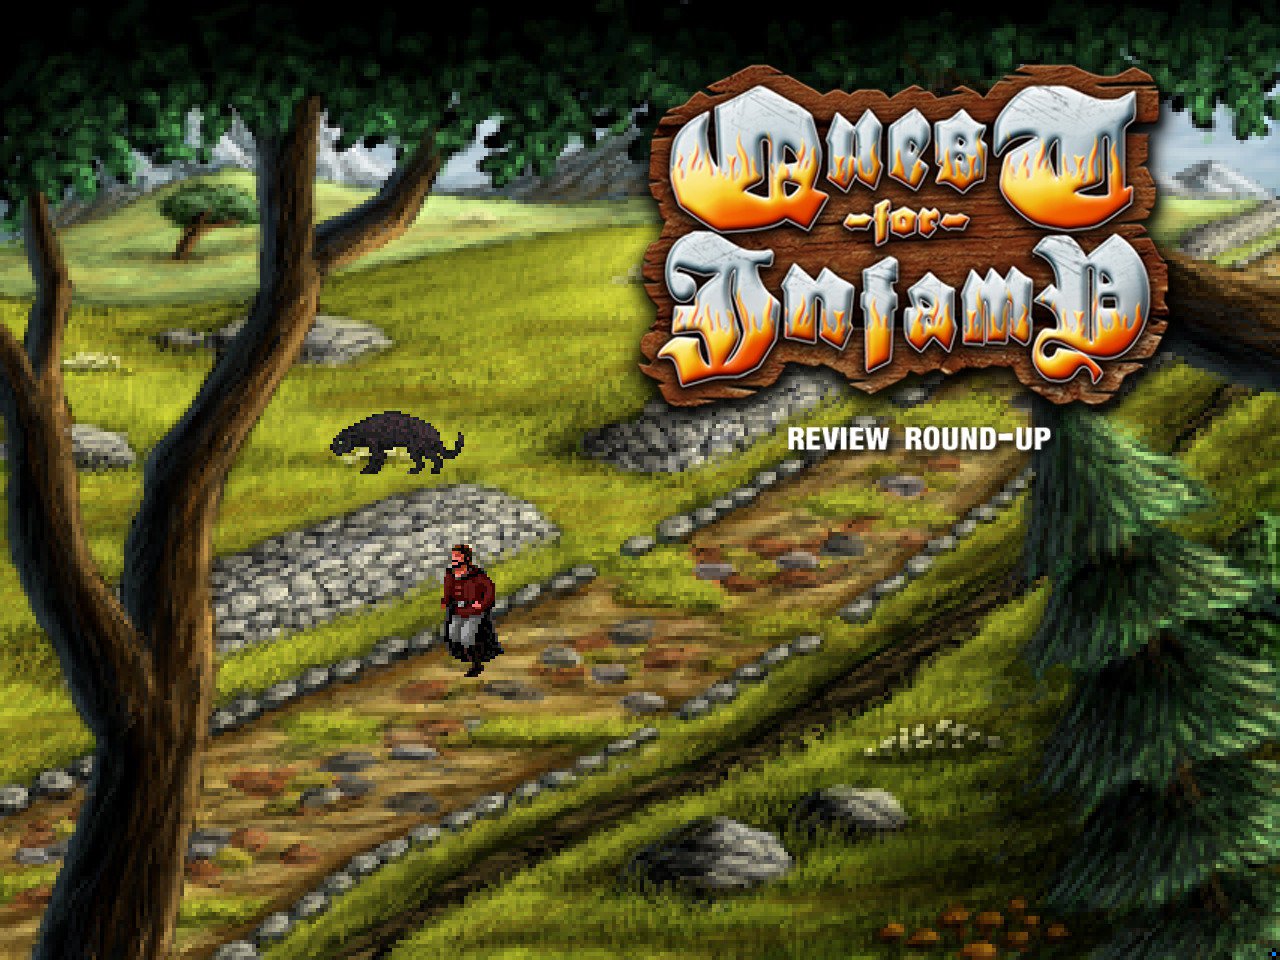 Quest For Infamy has been has been out for just slightly over a week now and reviews have been pouring in from various review outlets. So why don’t we take a look at what some of the reviewers out there thought of our game?Mouse N&#8217; Joypad:&#8220;Quest For Infamy is a game that celebrates and builds upon its legacy. It takes one of the most lucrative genres of the (relatively) old days, slaps some RPG on top of it and adds hilarious commentary for good measure. This is the best example of an old-school game done right.&#8221;Gamezebo:&#8220;The result is a game that is nearly perfect in its presentation—its characters, dialogue, puzzles, and world are brilliant in their combination of believable depth and ridiculousness&#8221;Sticky Trigger:&#8220;Fans of the old Sierra games will lap this up without hesitation. Its a great homage to the age old Point and Click adventure, and it pulls it off flawlessly.&#8221;Infotainment News:&#8220;This is a fun throwback type of game with a sense of humor and purposefully retro-graphics.   It has a few quirks here and there but overall seems like a lot of fun&#8221;Leviathyn:&#8220;it should not be missed by anyone with fond memories of Sierra’s golden age.&#8221;Gamebreak:&#8220;It’s a blast from the past that doesn’t take itself serious and does a wonderful job at balancing brilliance with slapstick buffoonery!&#8221;It’s humbling to see that so many enjoyed Quest For Infamy and that adventure games can still connect with gamers everywhere. We hope you&#8217;re enjoying the game game and we’d like to thank you, the community for all the support. Until next time.Gonçalo GonçalvesSocial Media AssociatePhoenix Online Studios